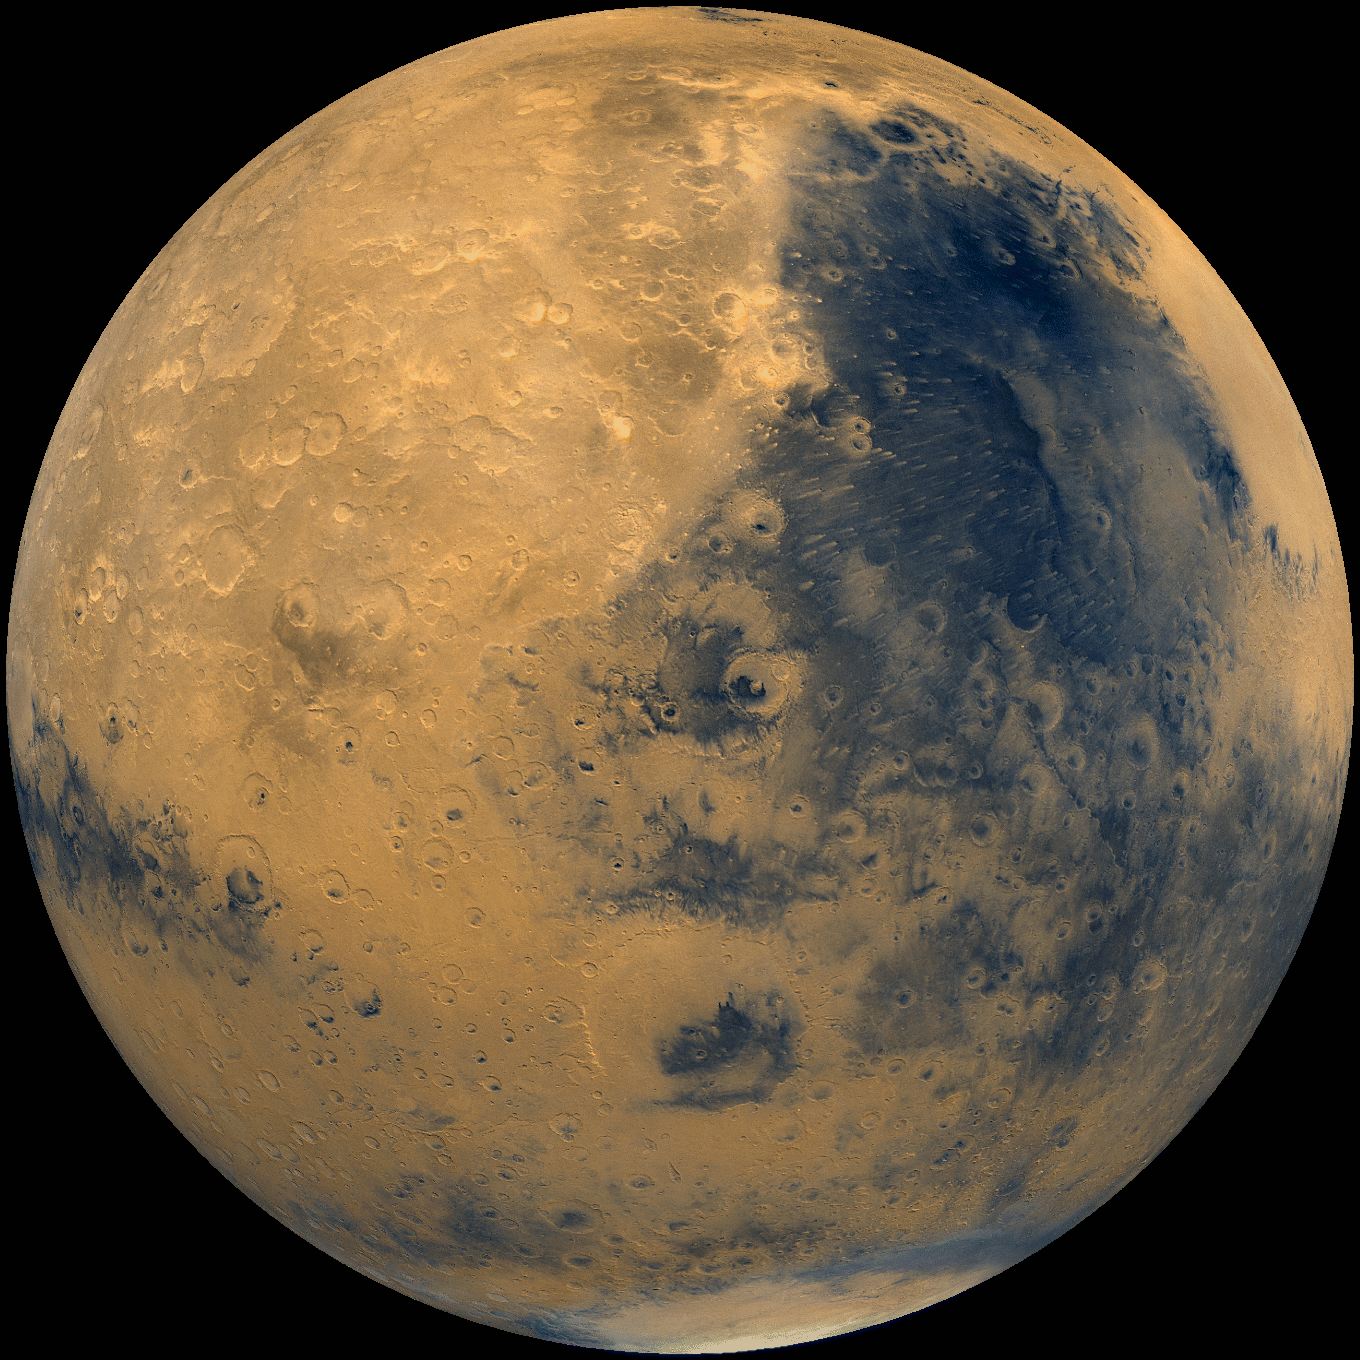 Mars can have more water than scientists think